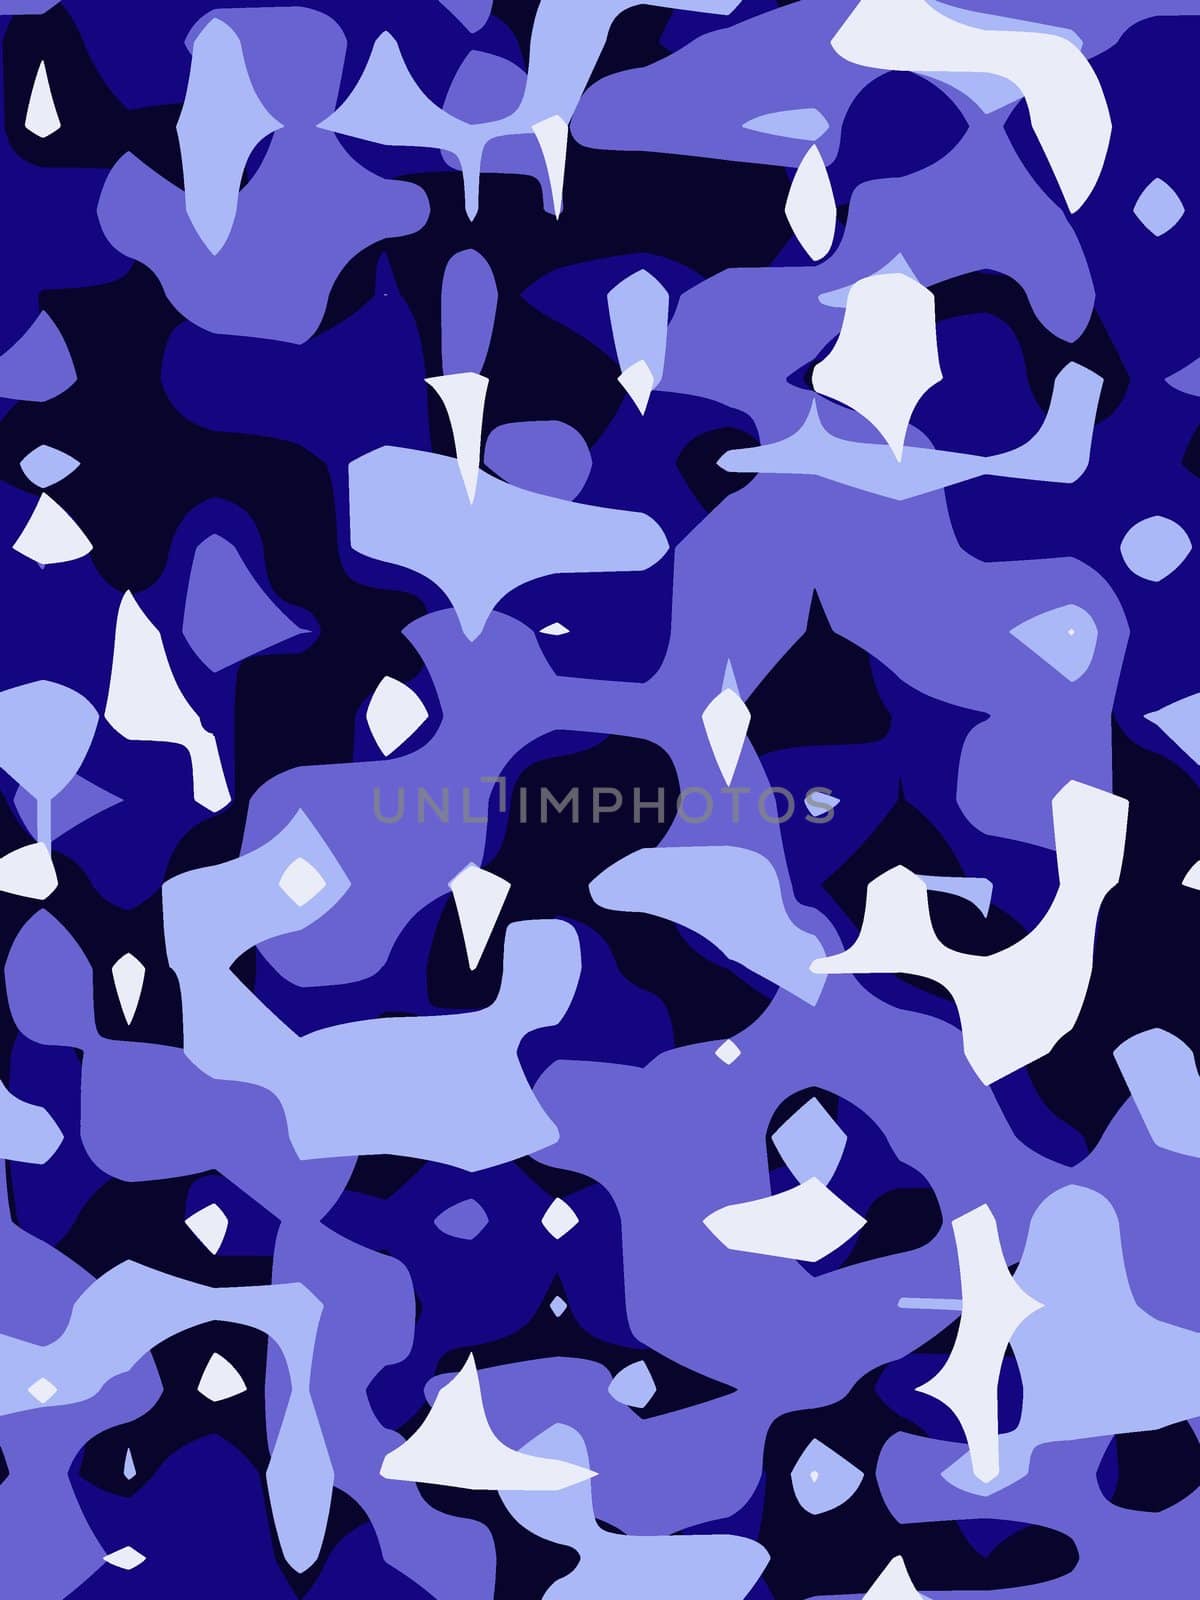 a camouflage texture pattern with blue tones